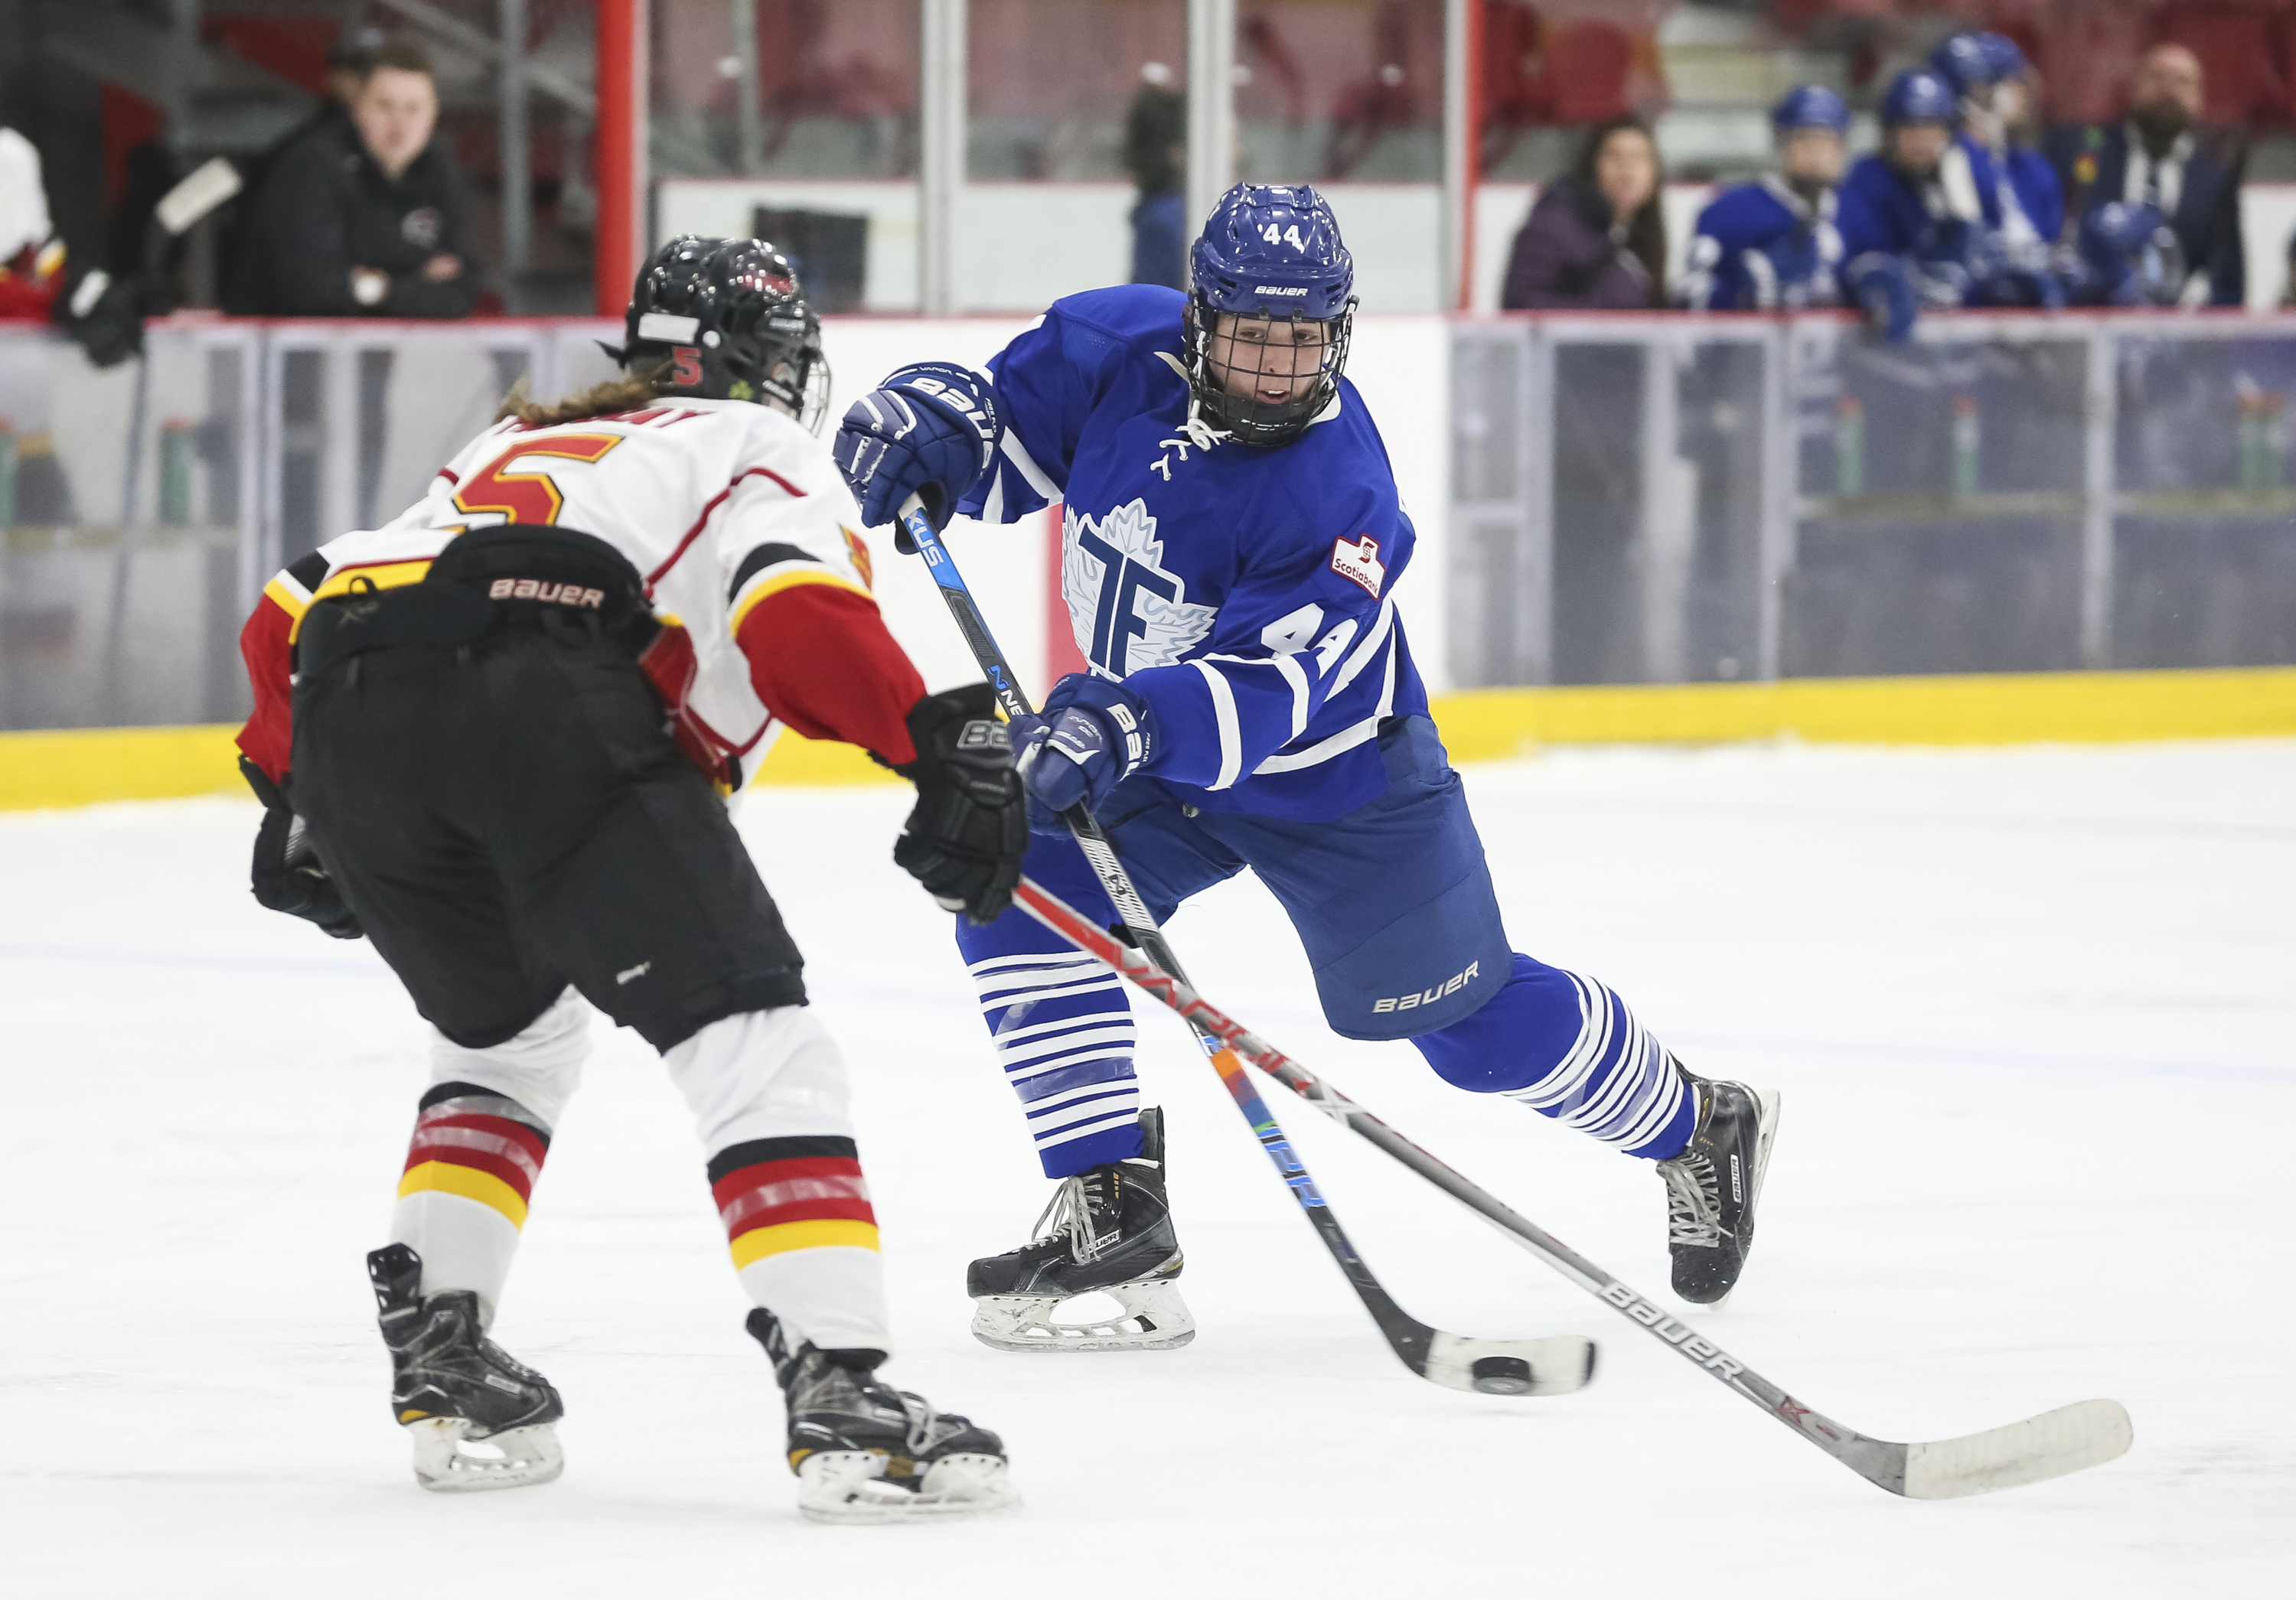 Jenna Dingeldein (44) of the Toronto Furies battles Kelly Murray (5) of the Calgary Inferno.